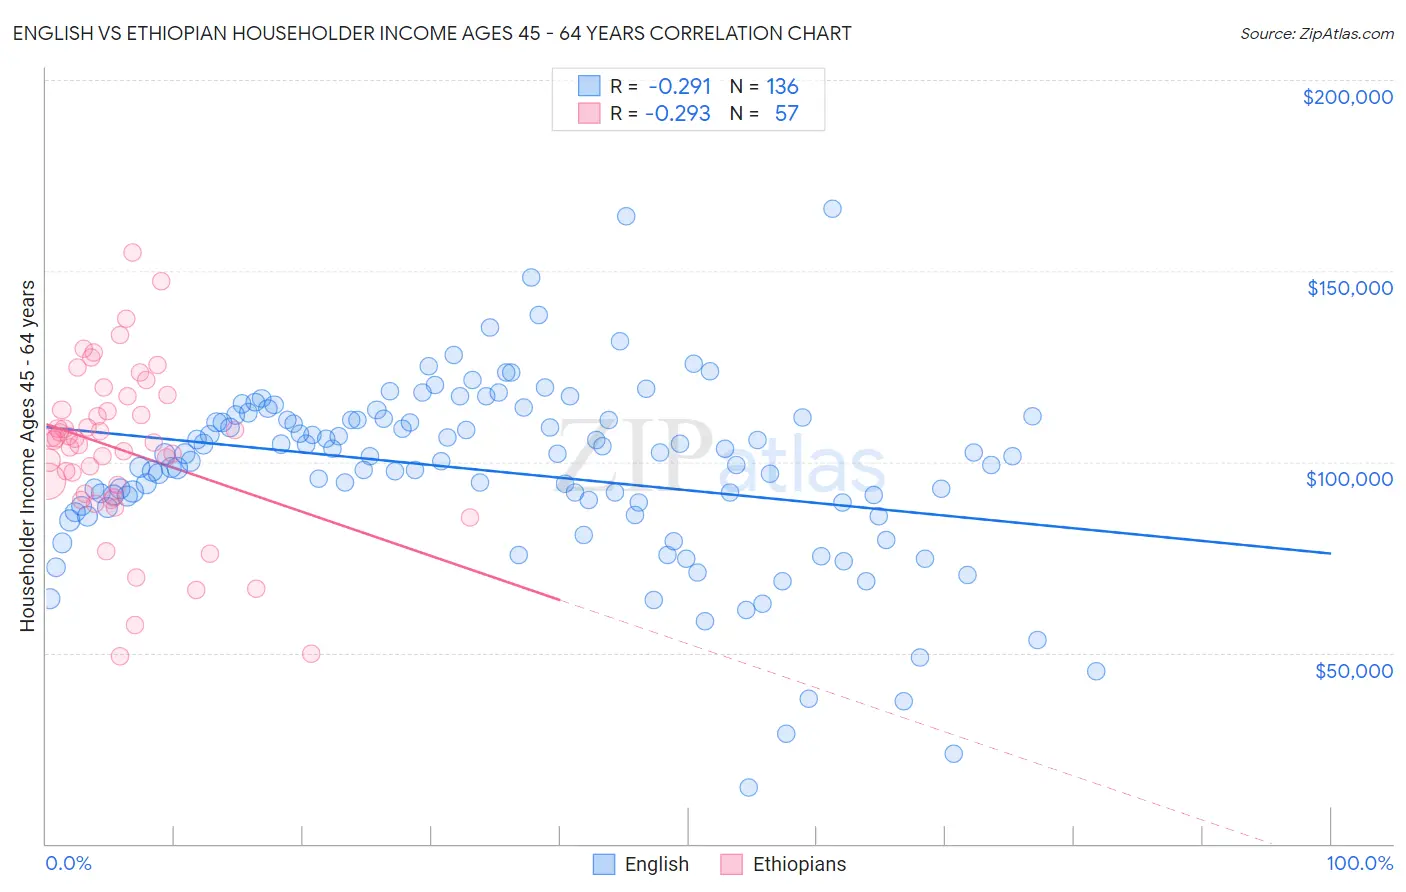 English vs Ethiopian Householder Income Ages 45 - 64 years